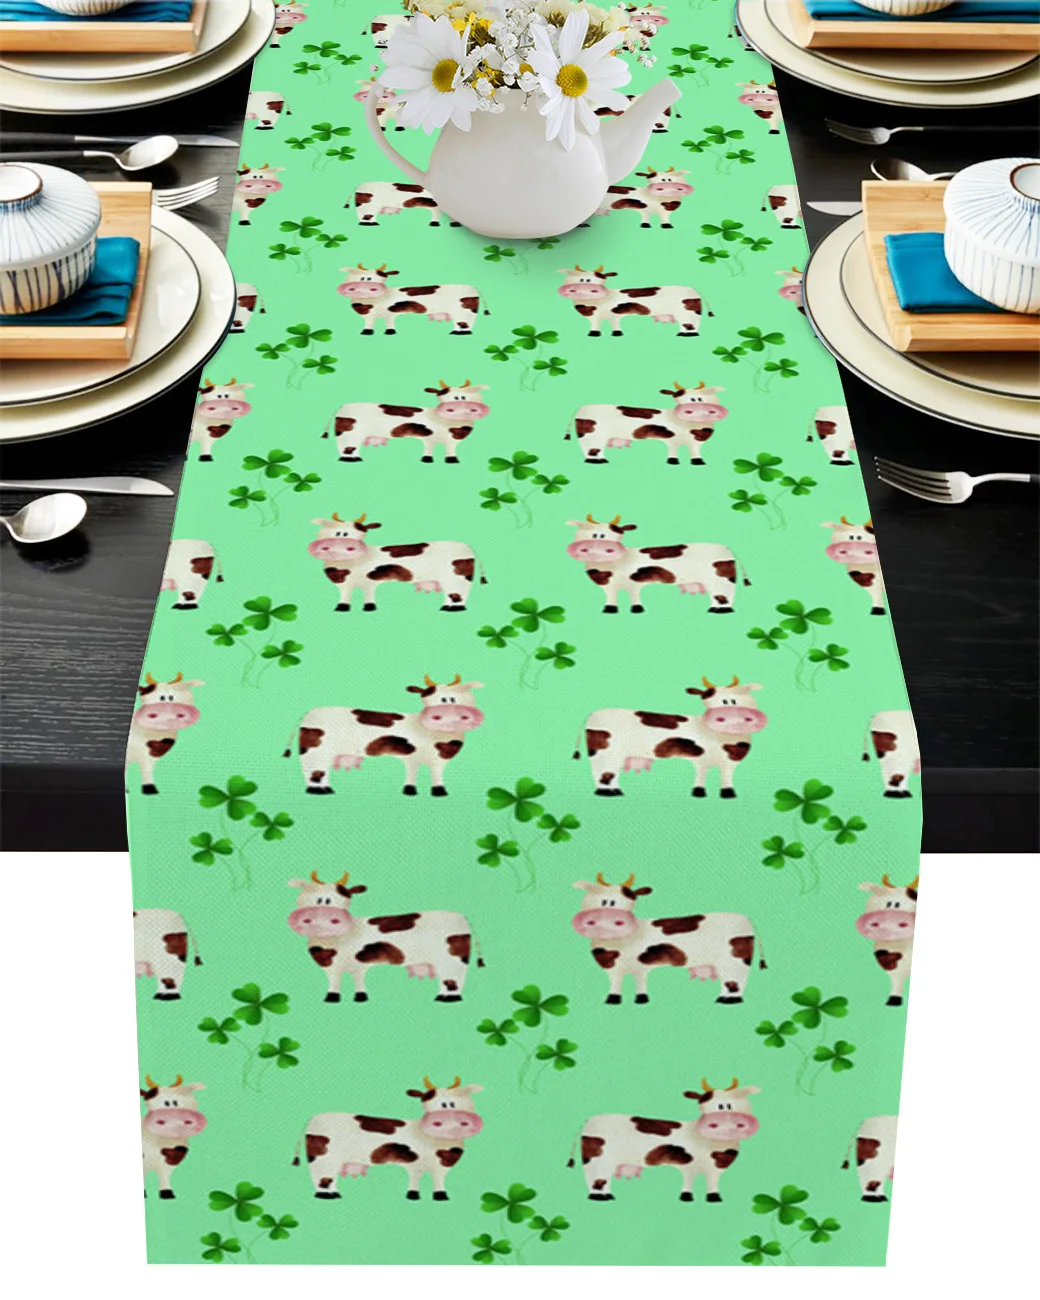 

Farm Animal Cow Shamrock Table Runner Wedding Table Decor Party Dining Table Runner Home Hotel Decoration Tablecloth Placemat